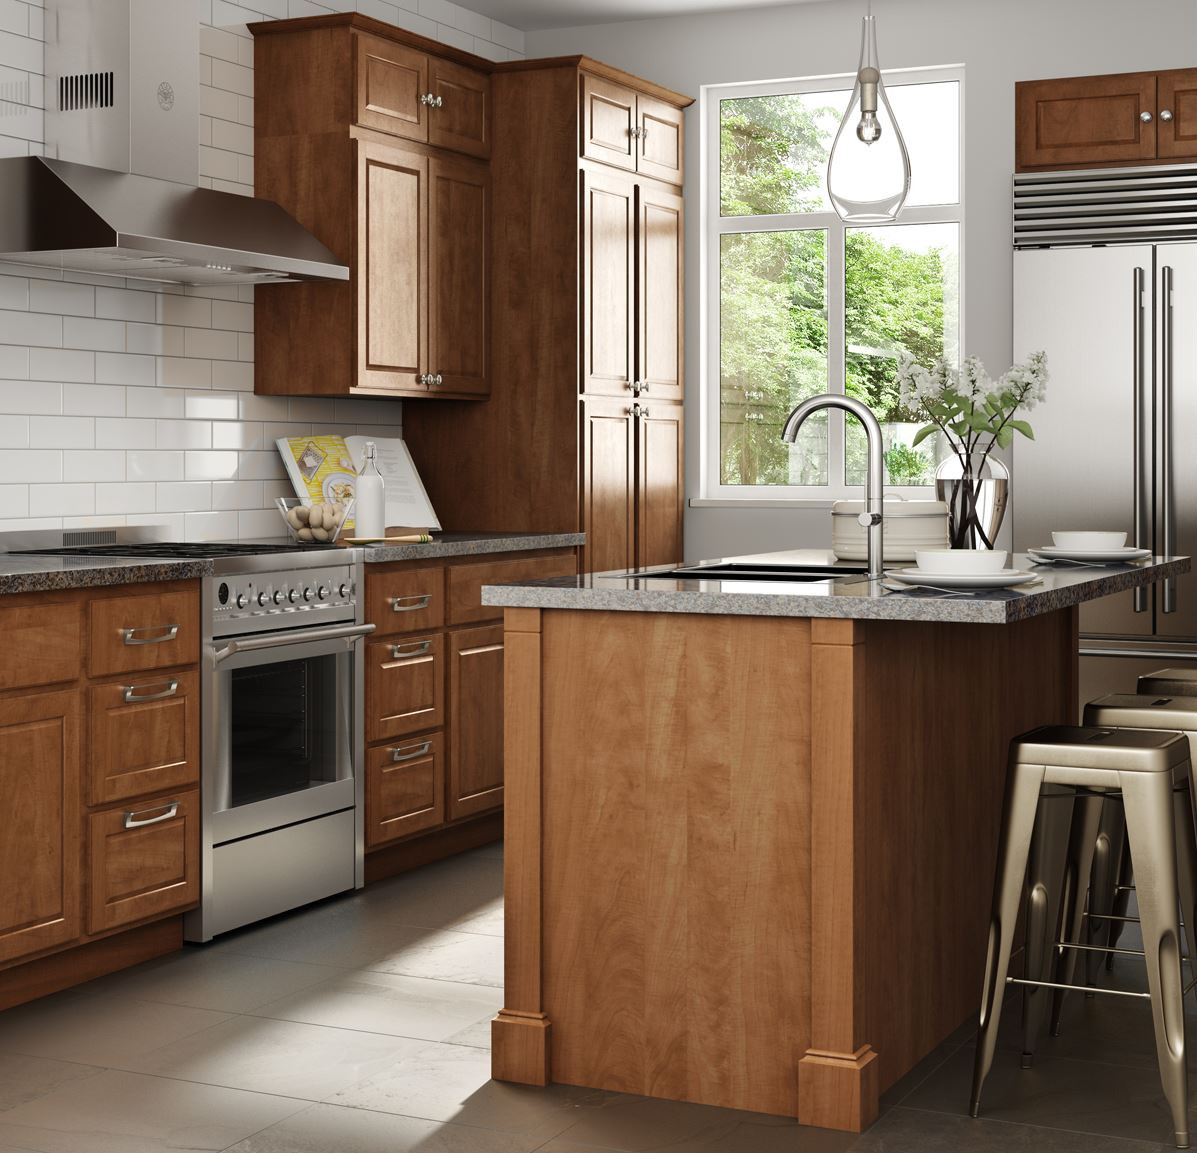 Homedepot Kitchen Cabinets
 Madison Base Cabinets in Cognac – Kitchen – The Home Depot